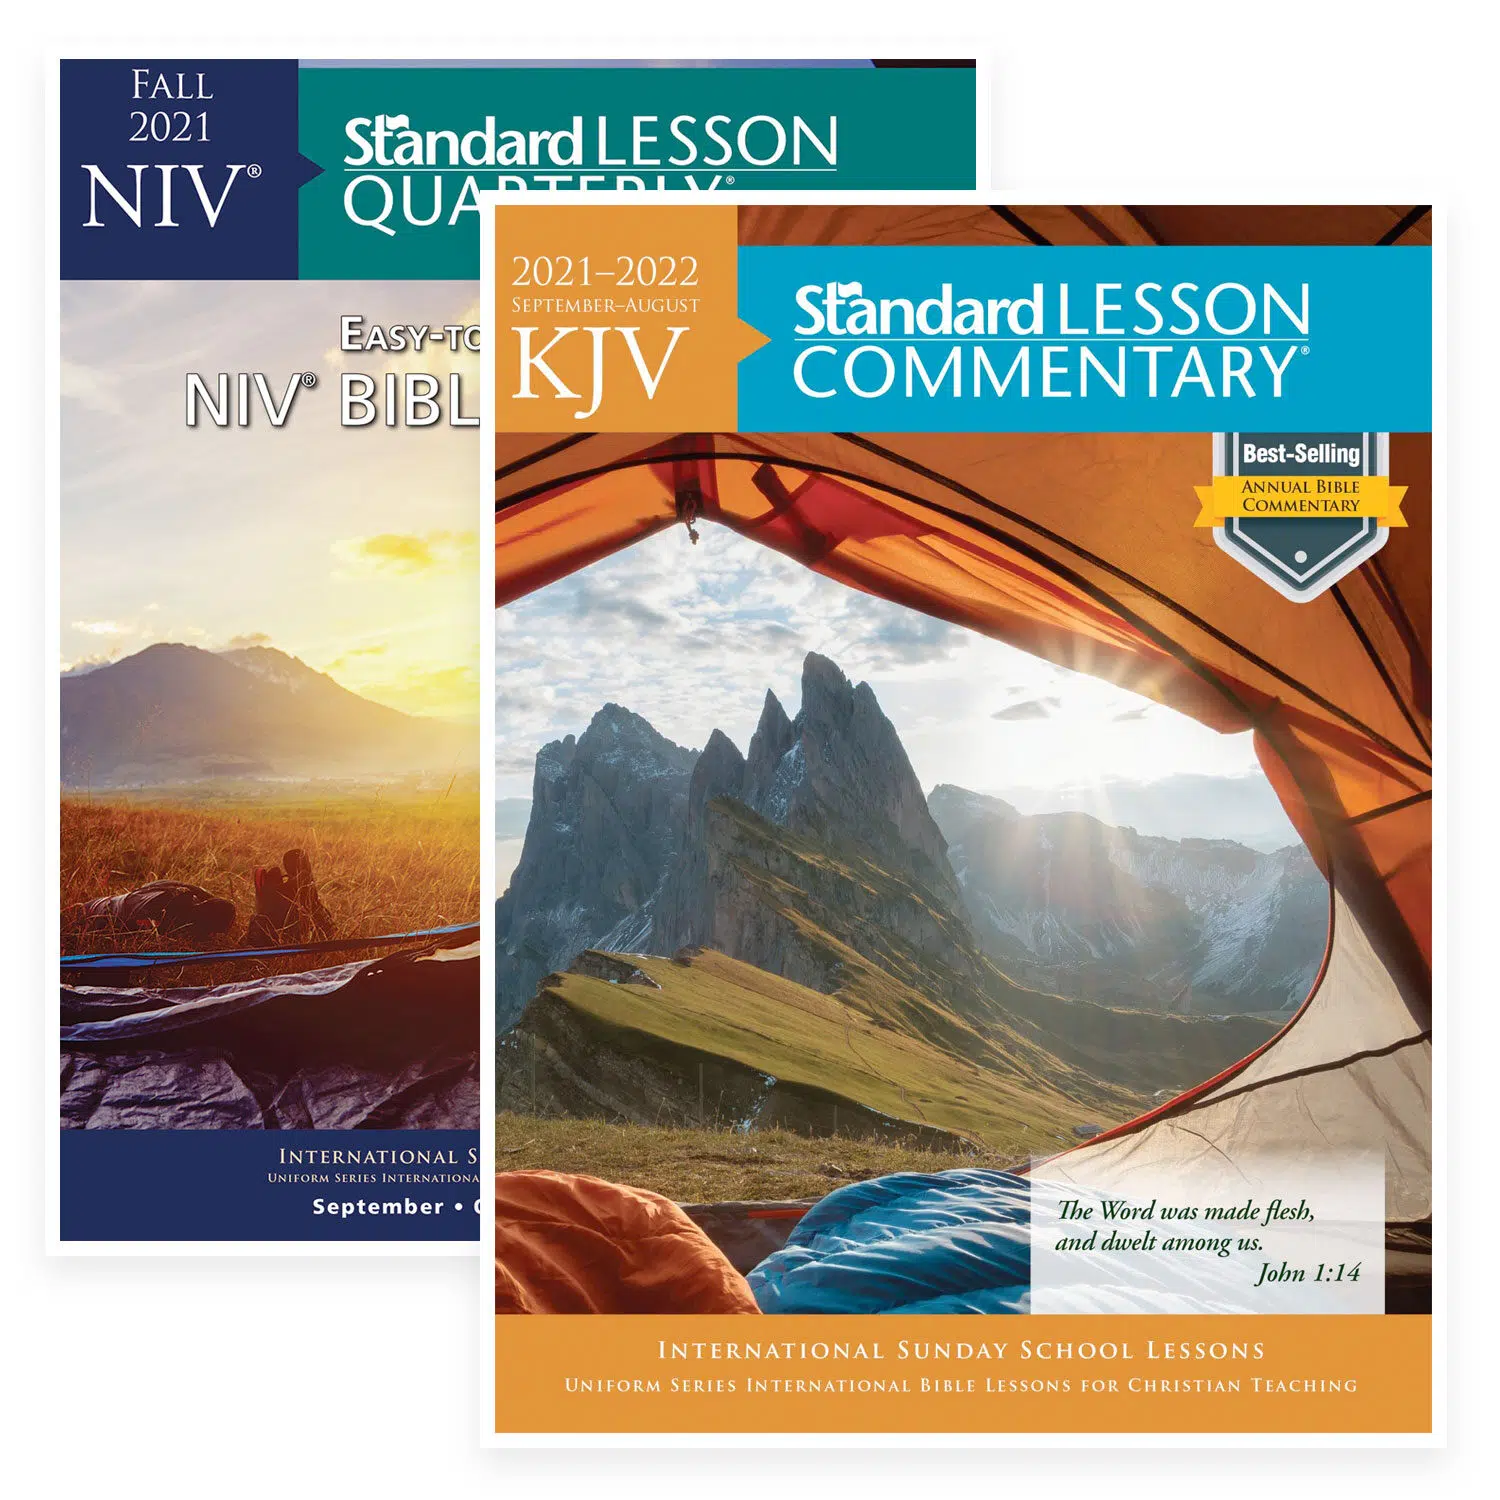 Standard Lesson Quarterly Lessons and Commentary